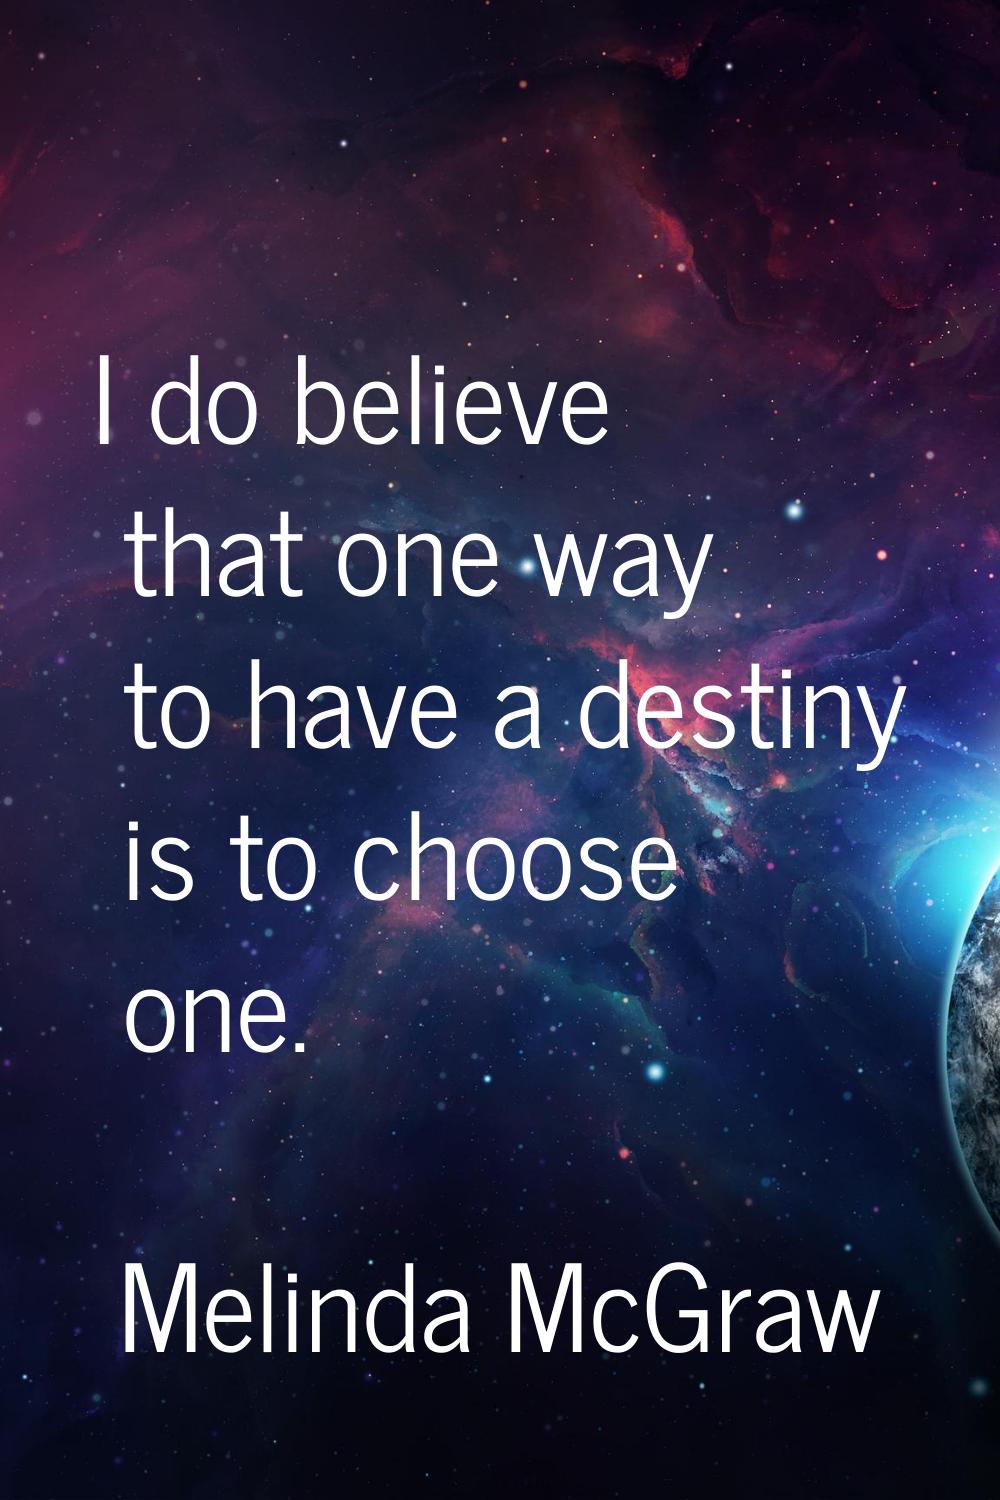 I do believe that one way to have a destiny is to choose one.